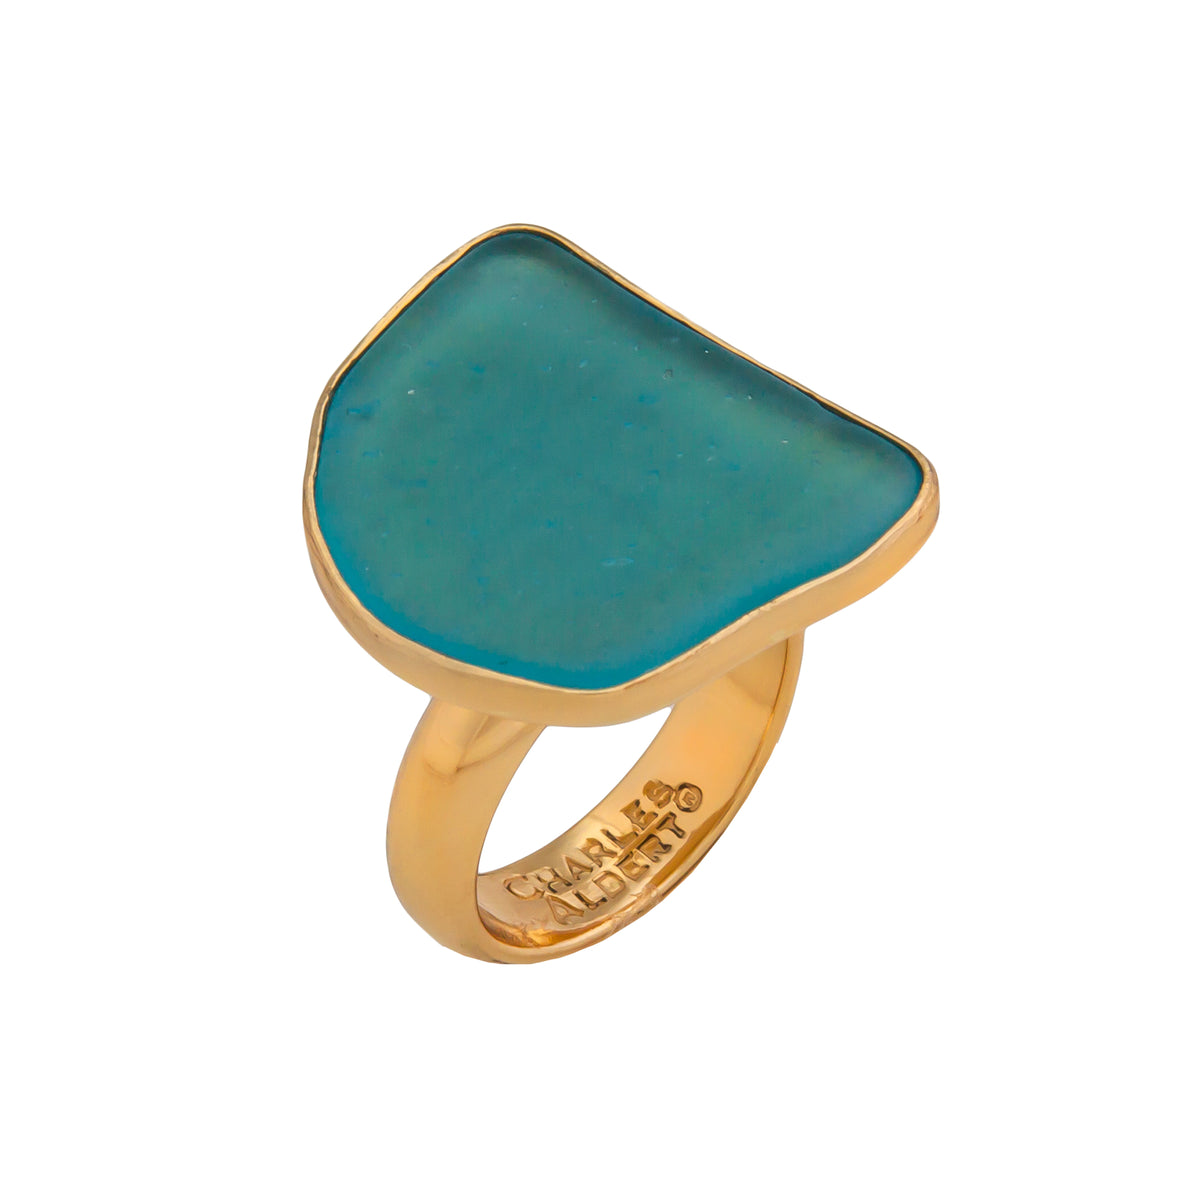 Charles Albert Jewelry - Alchemia Aqua Recycled Glass Adjustable Ring - Side View